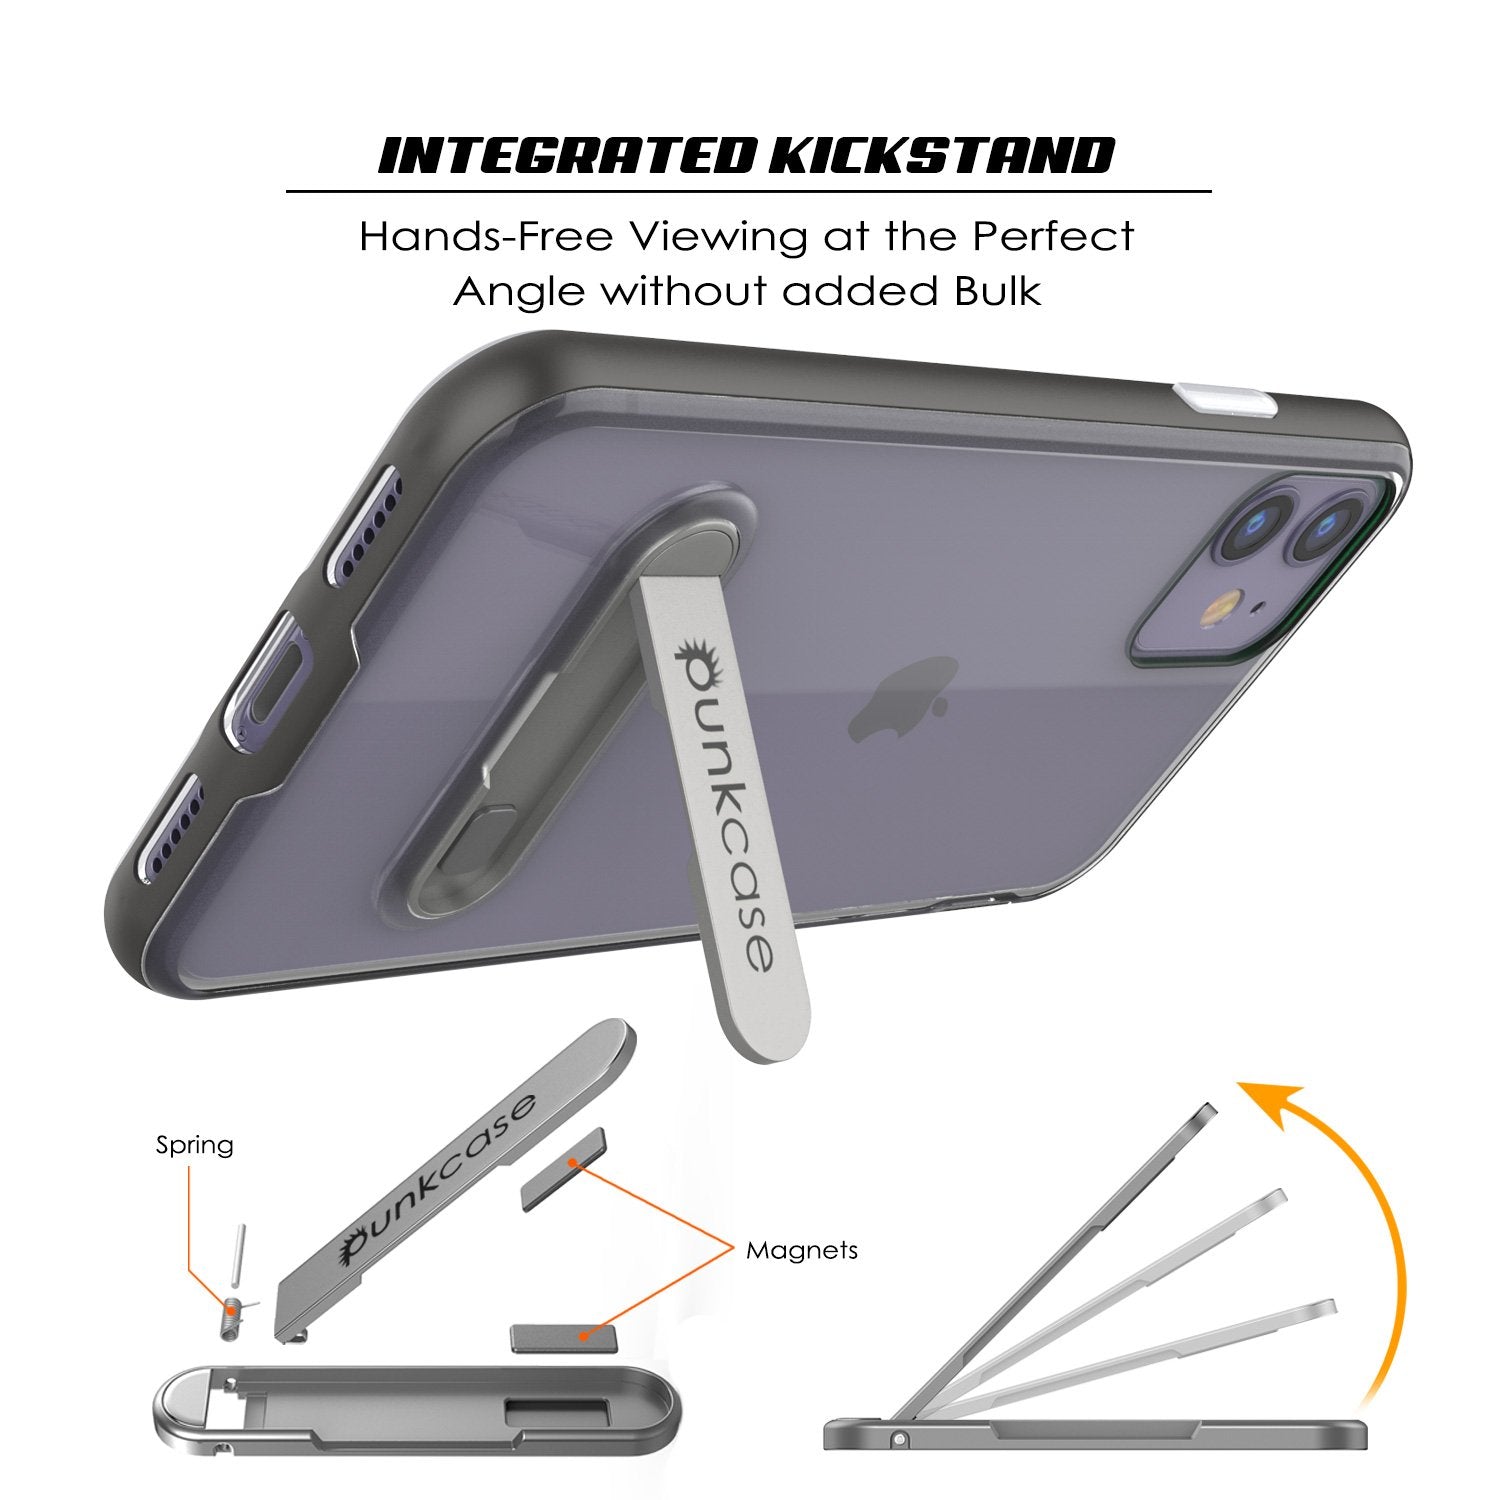 iPhone 12 Case, PUNKcase [LUCID 3.0 Series] [Slim Fit] Protective Cover w/ Integrated Screen Protector [Grey]